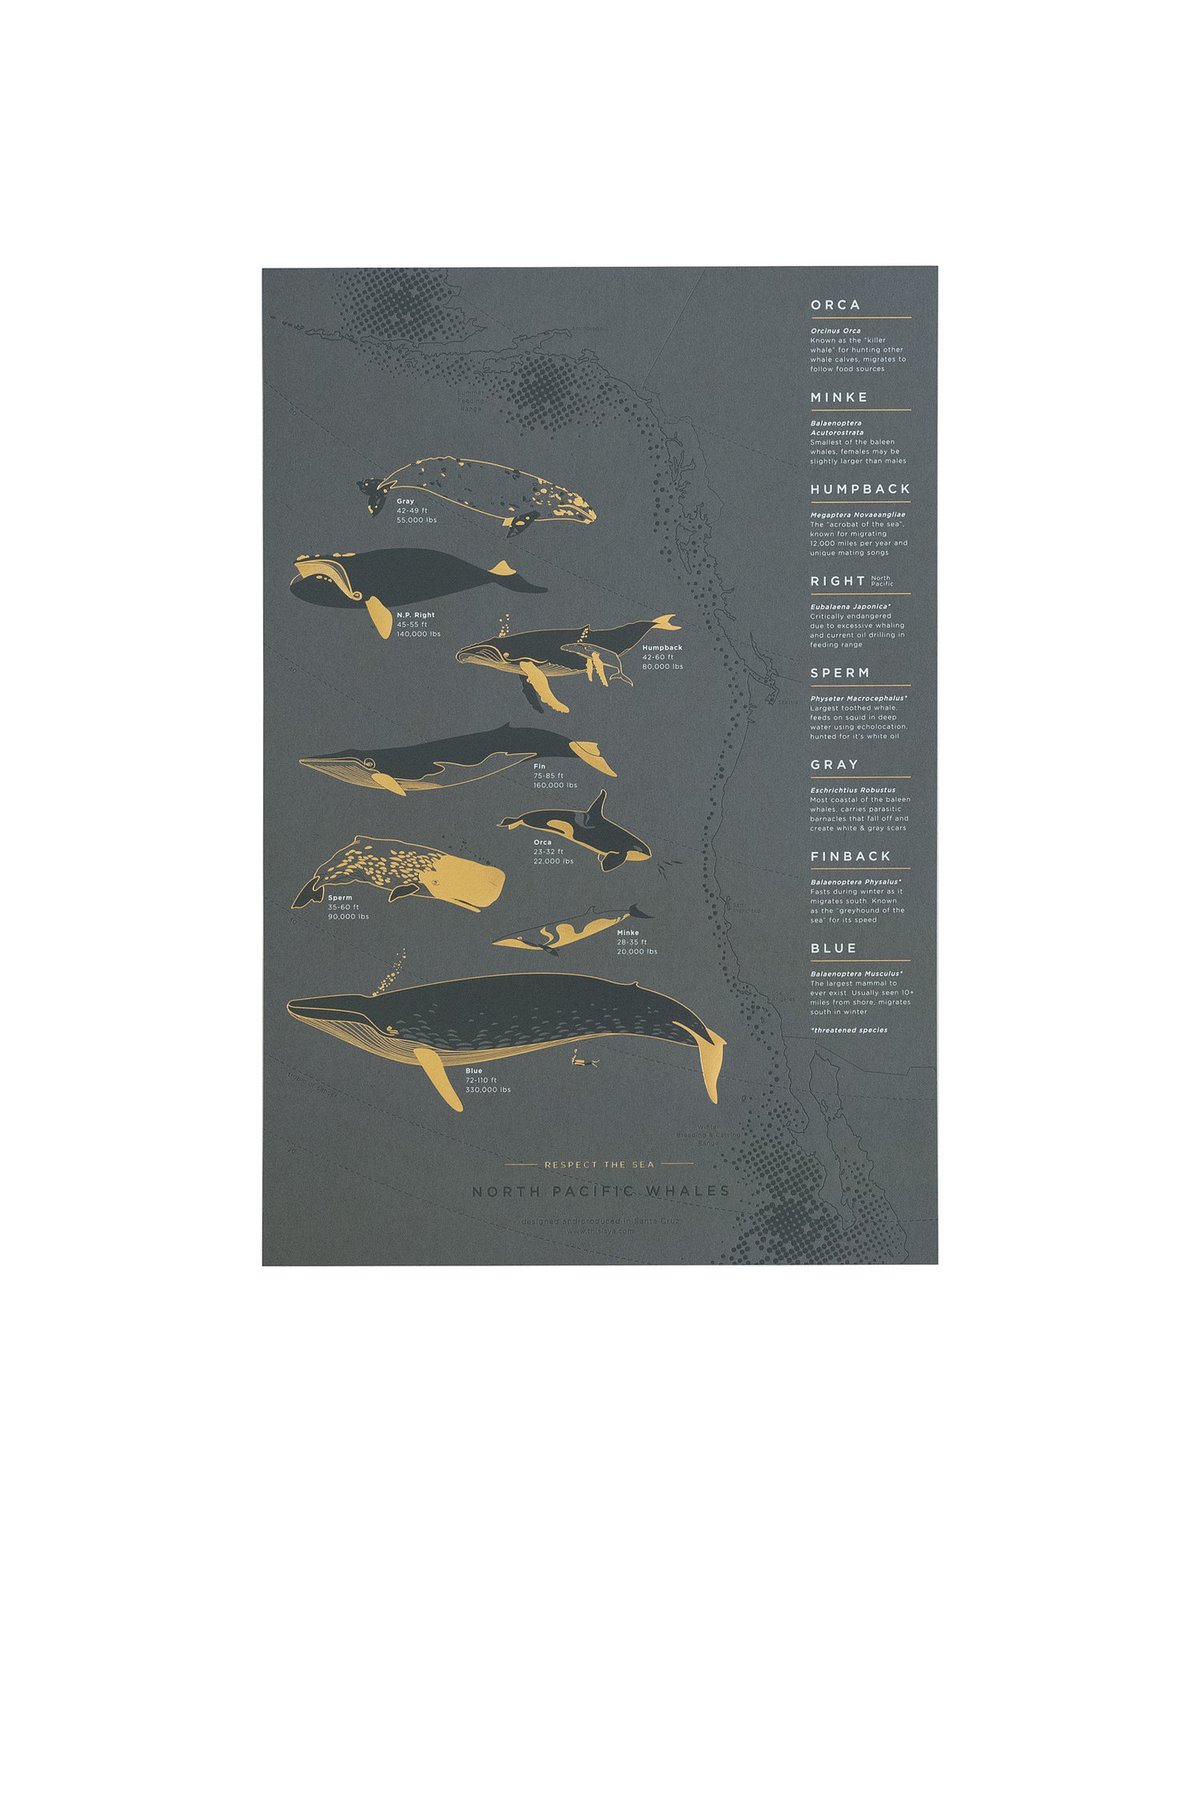 Image of North Pacific Whale Migration Letterpress Poster